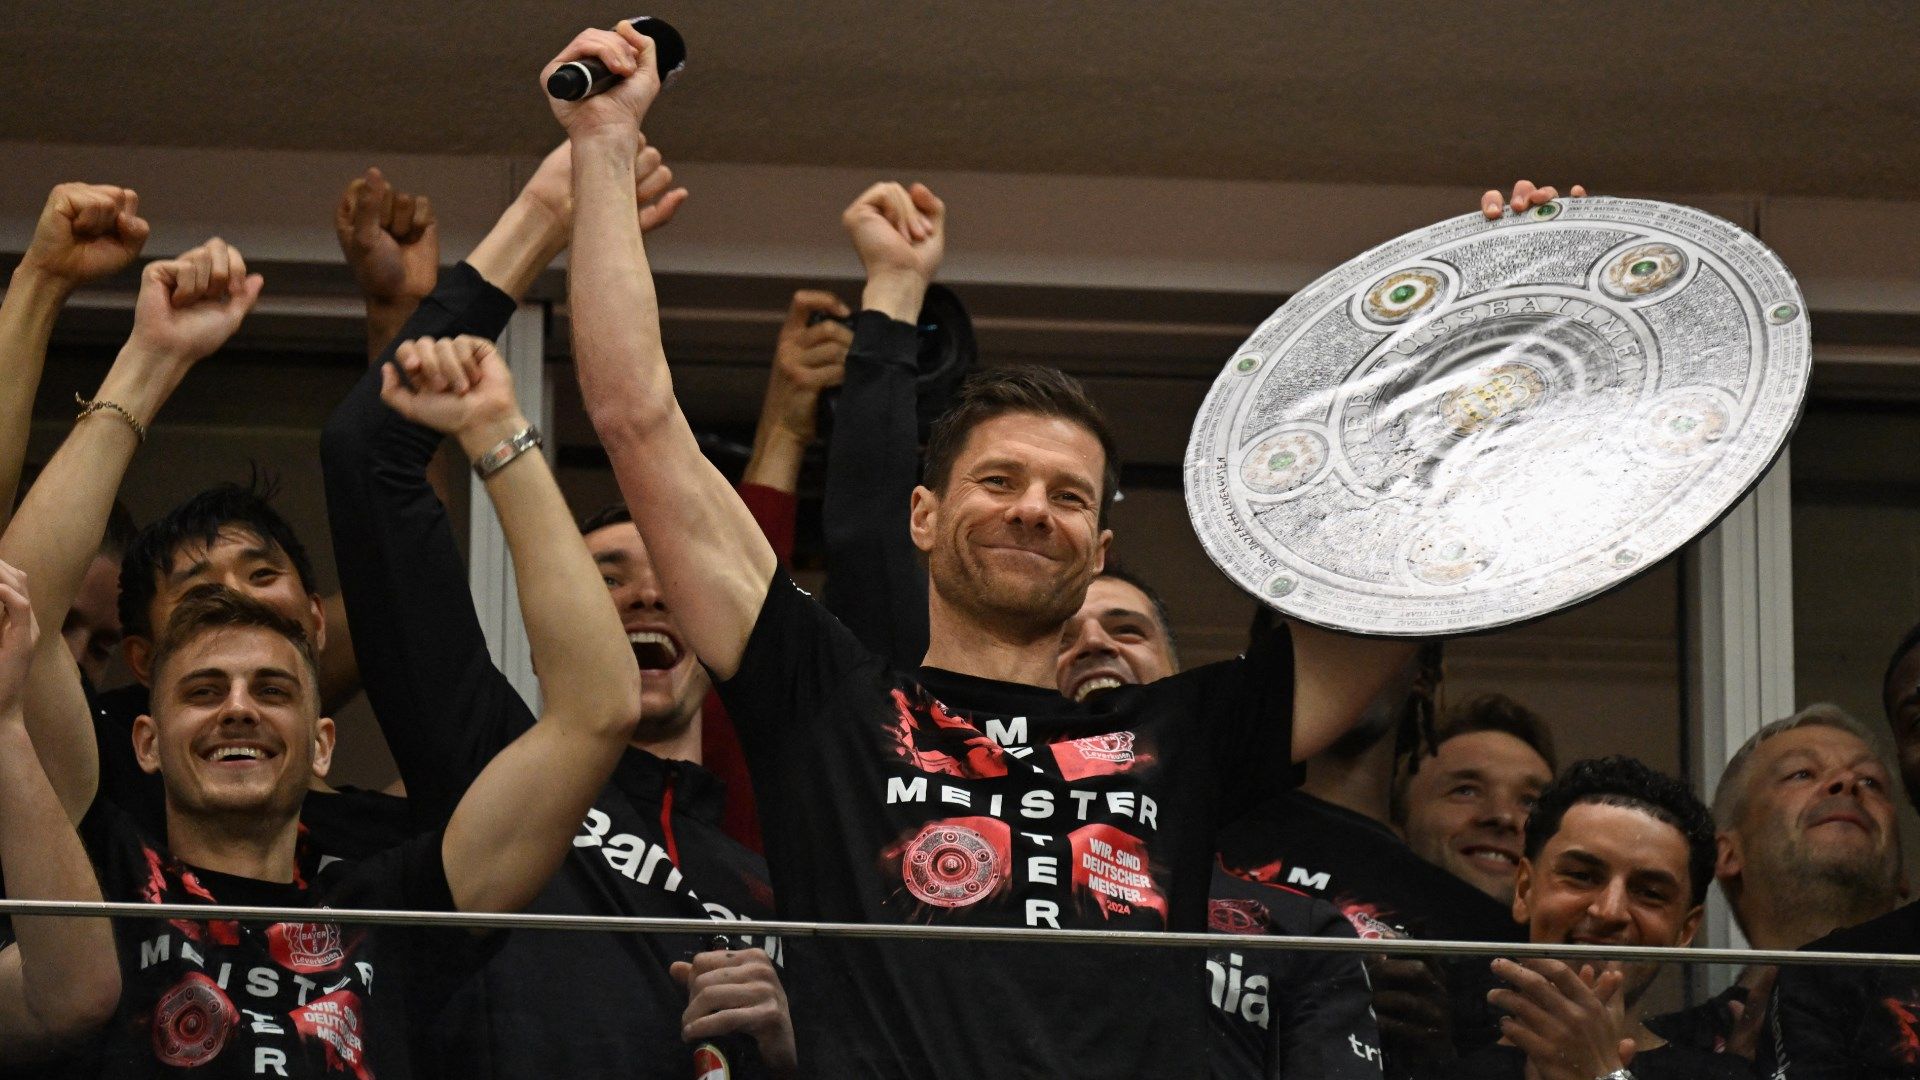 Xabi Alonso explains how he stayed cool under pressure to guide Bayer Leverkusen to remarkable first-ever Bundesliga title